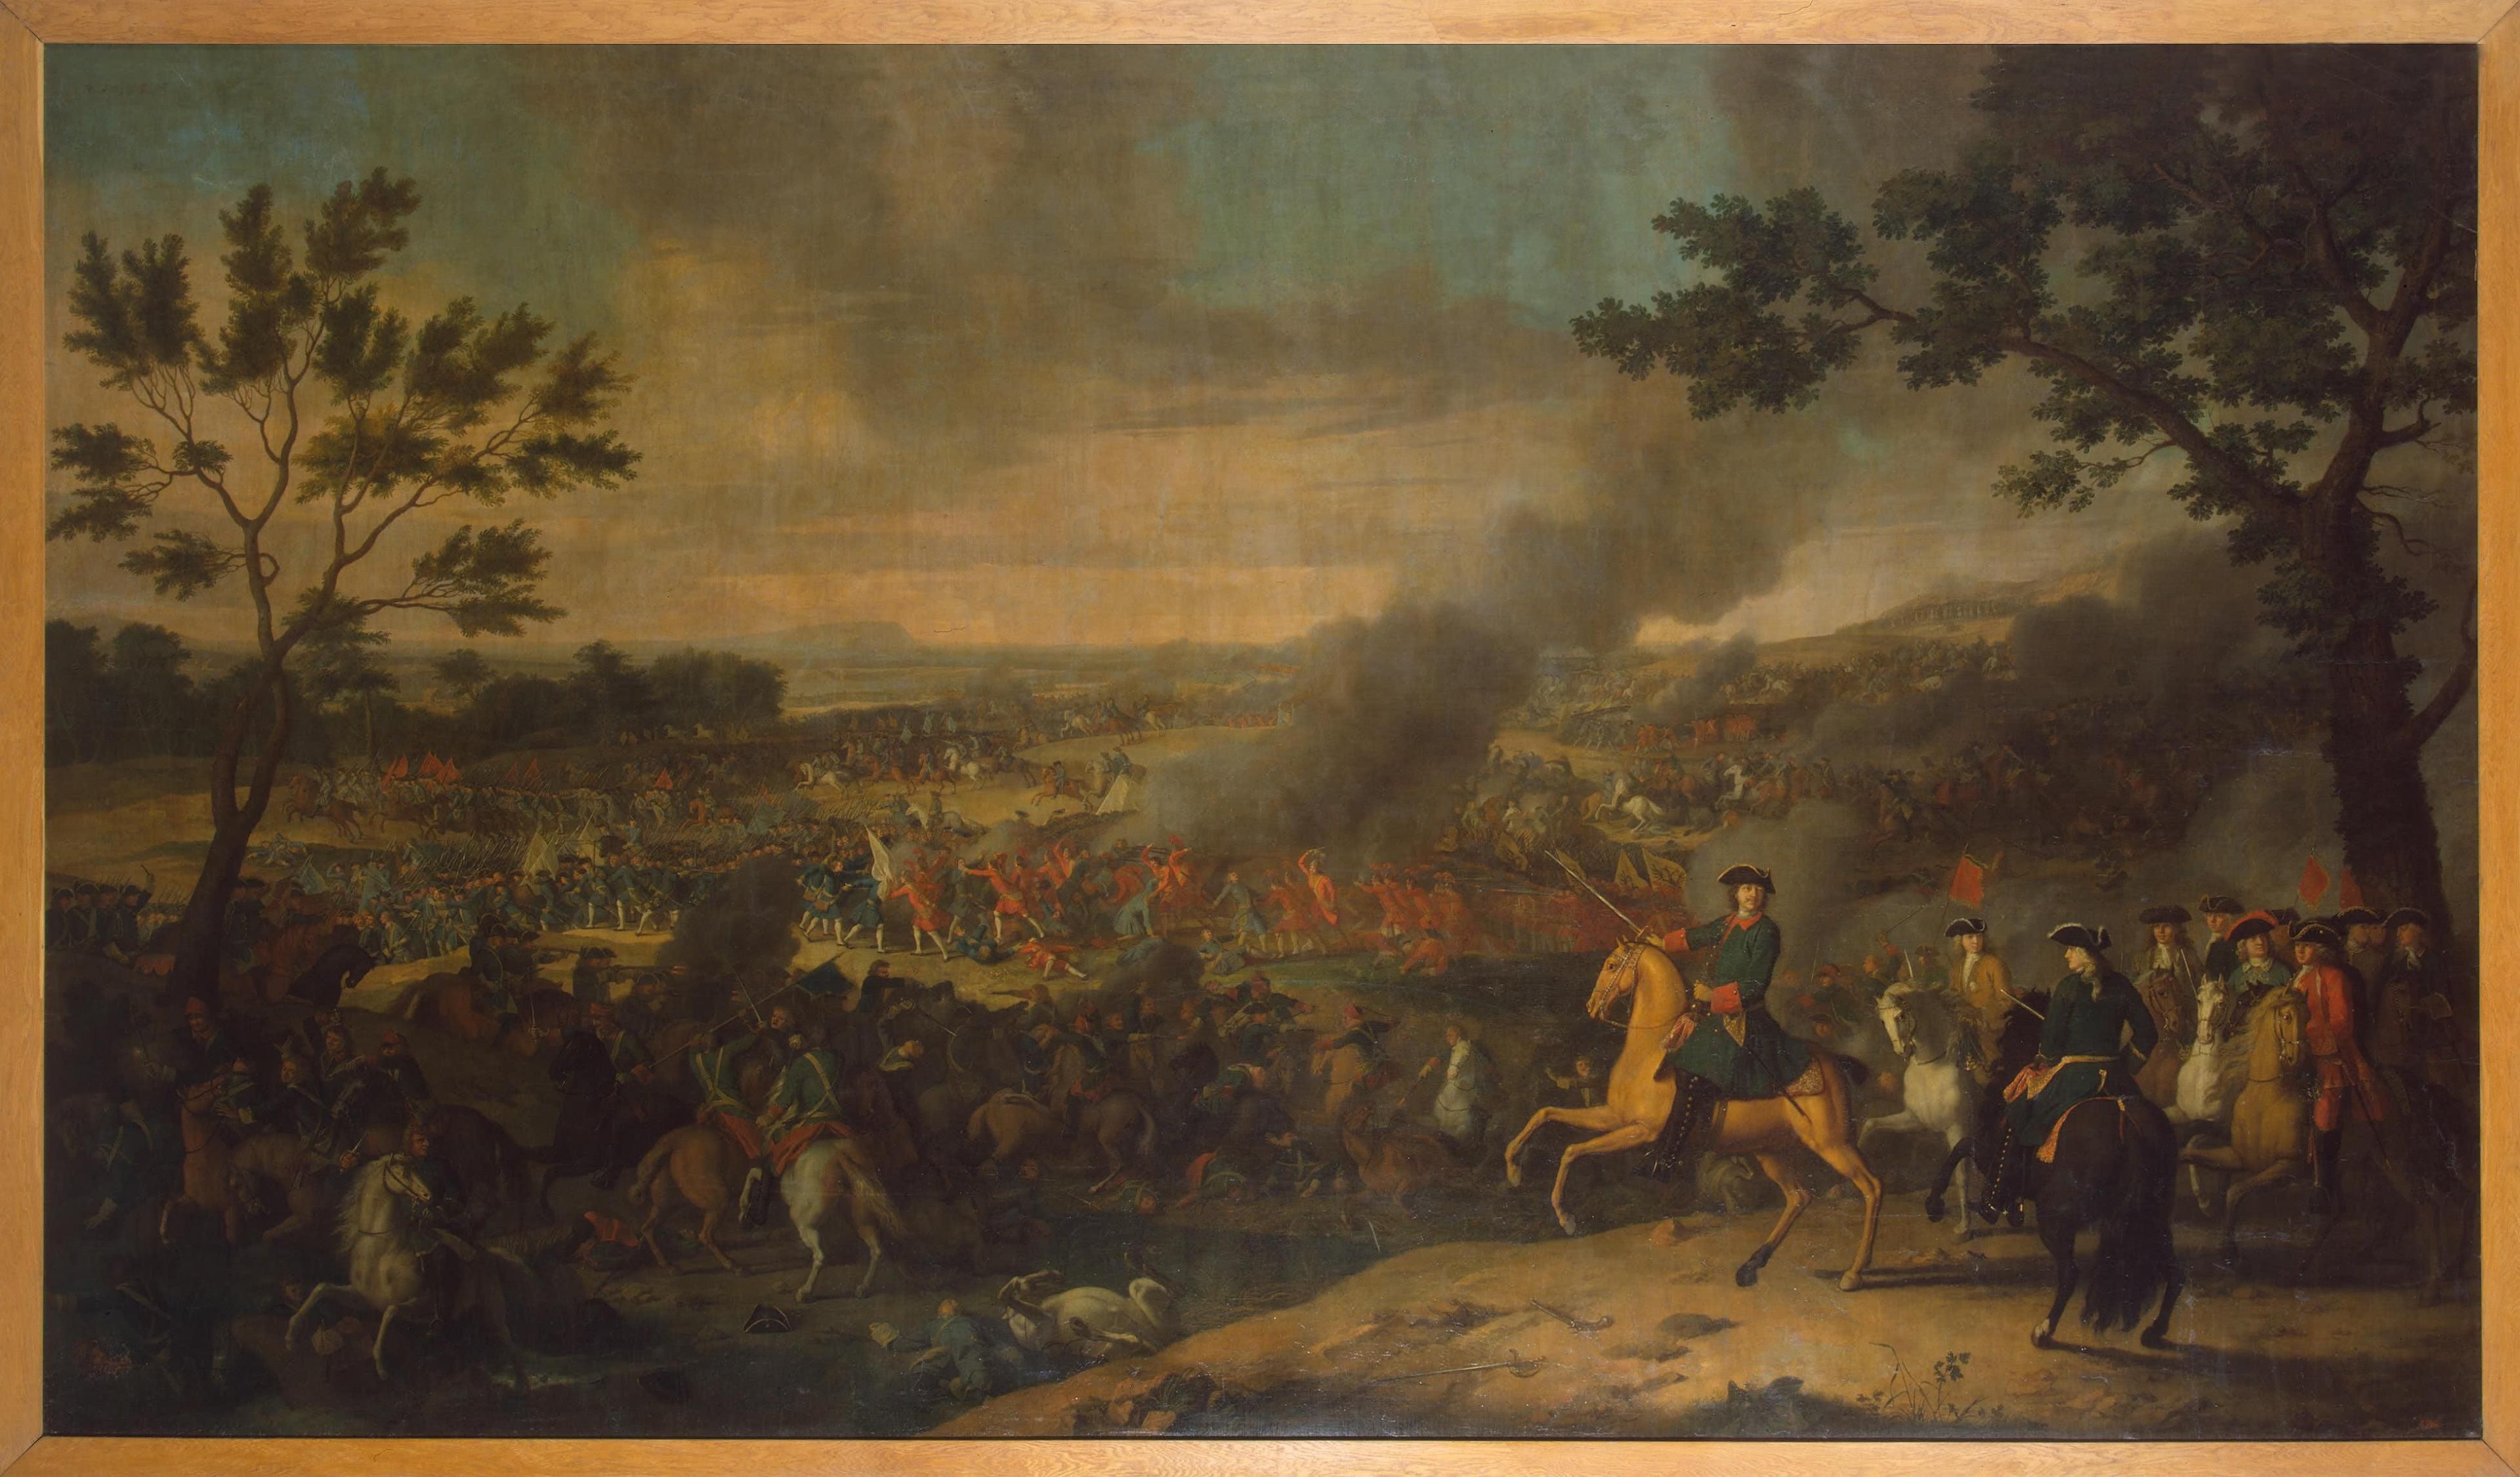 Battle of Poltava in 1709. Tsar Peter I of Russia is shown on a horse.